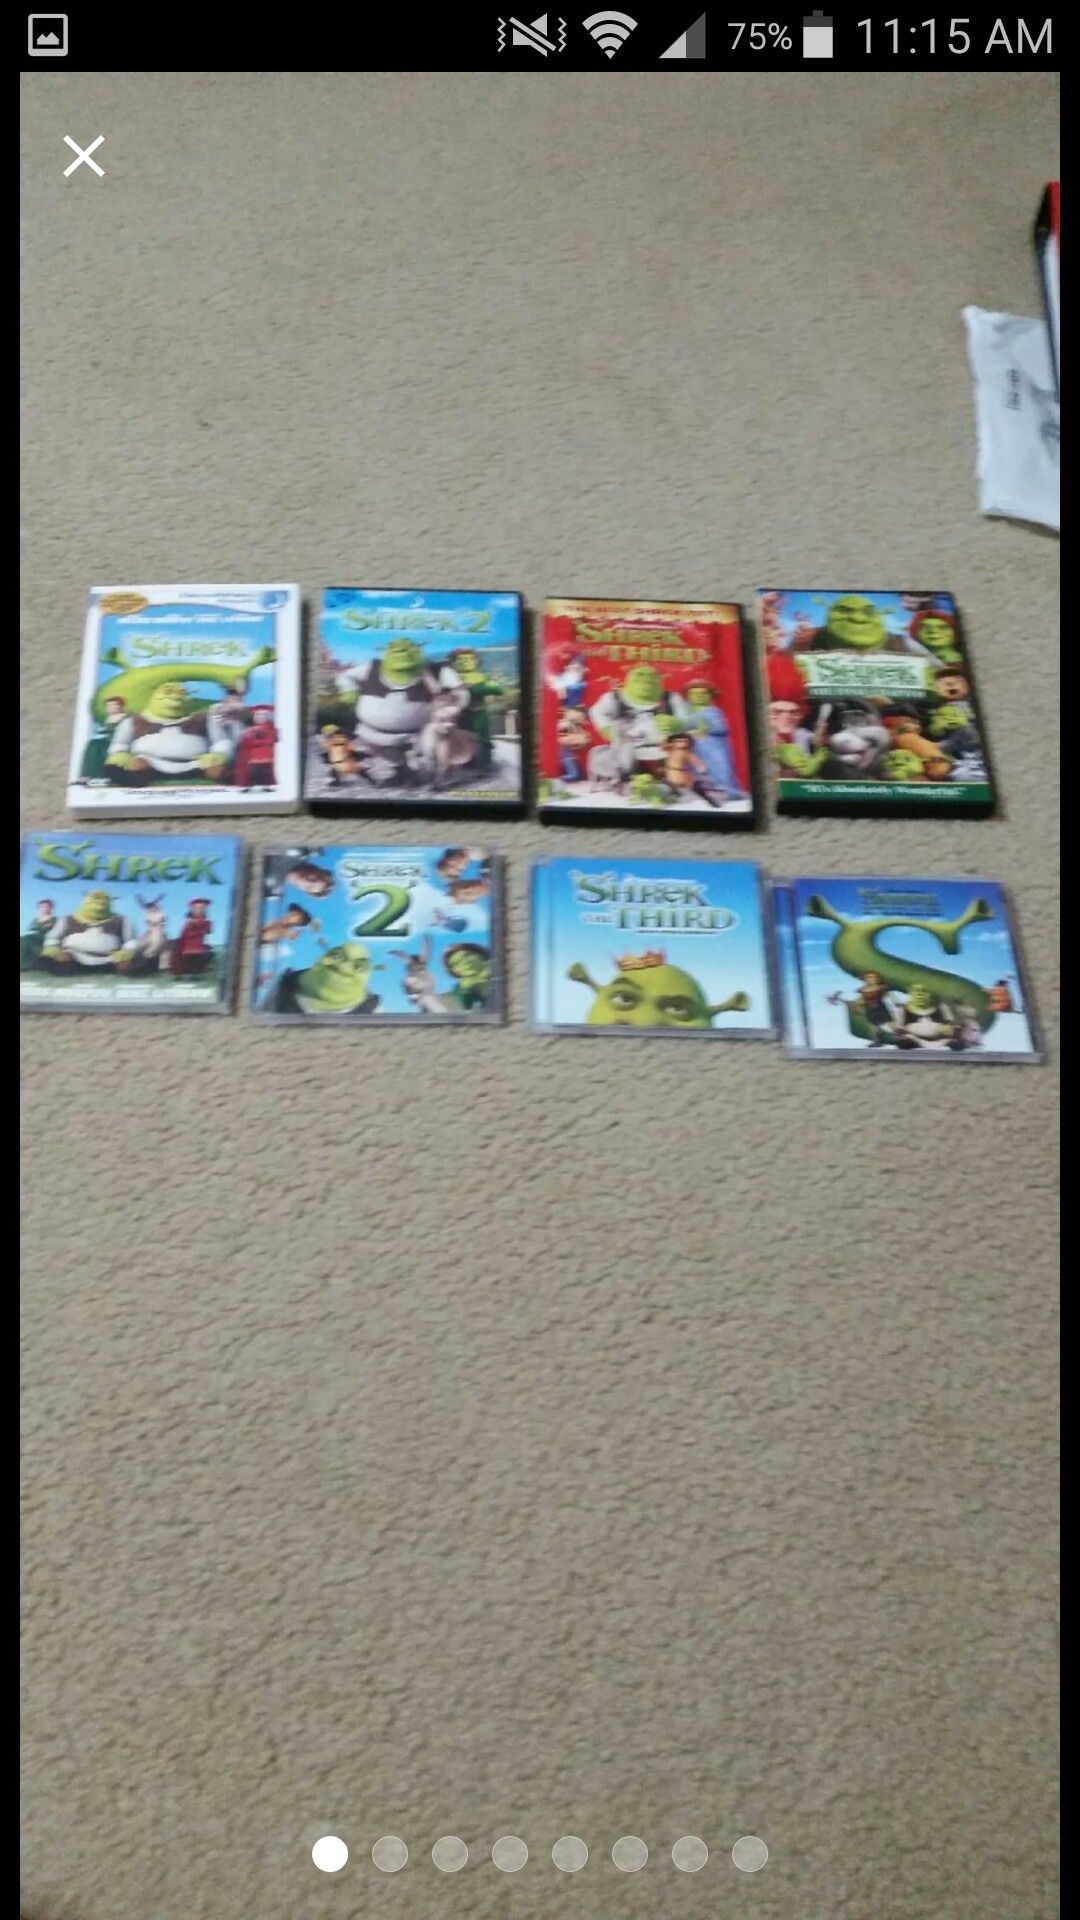 The Comple Shrek CD & DVD Collection